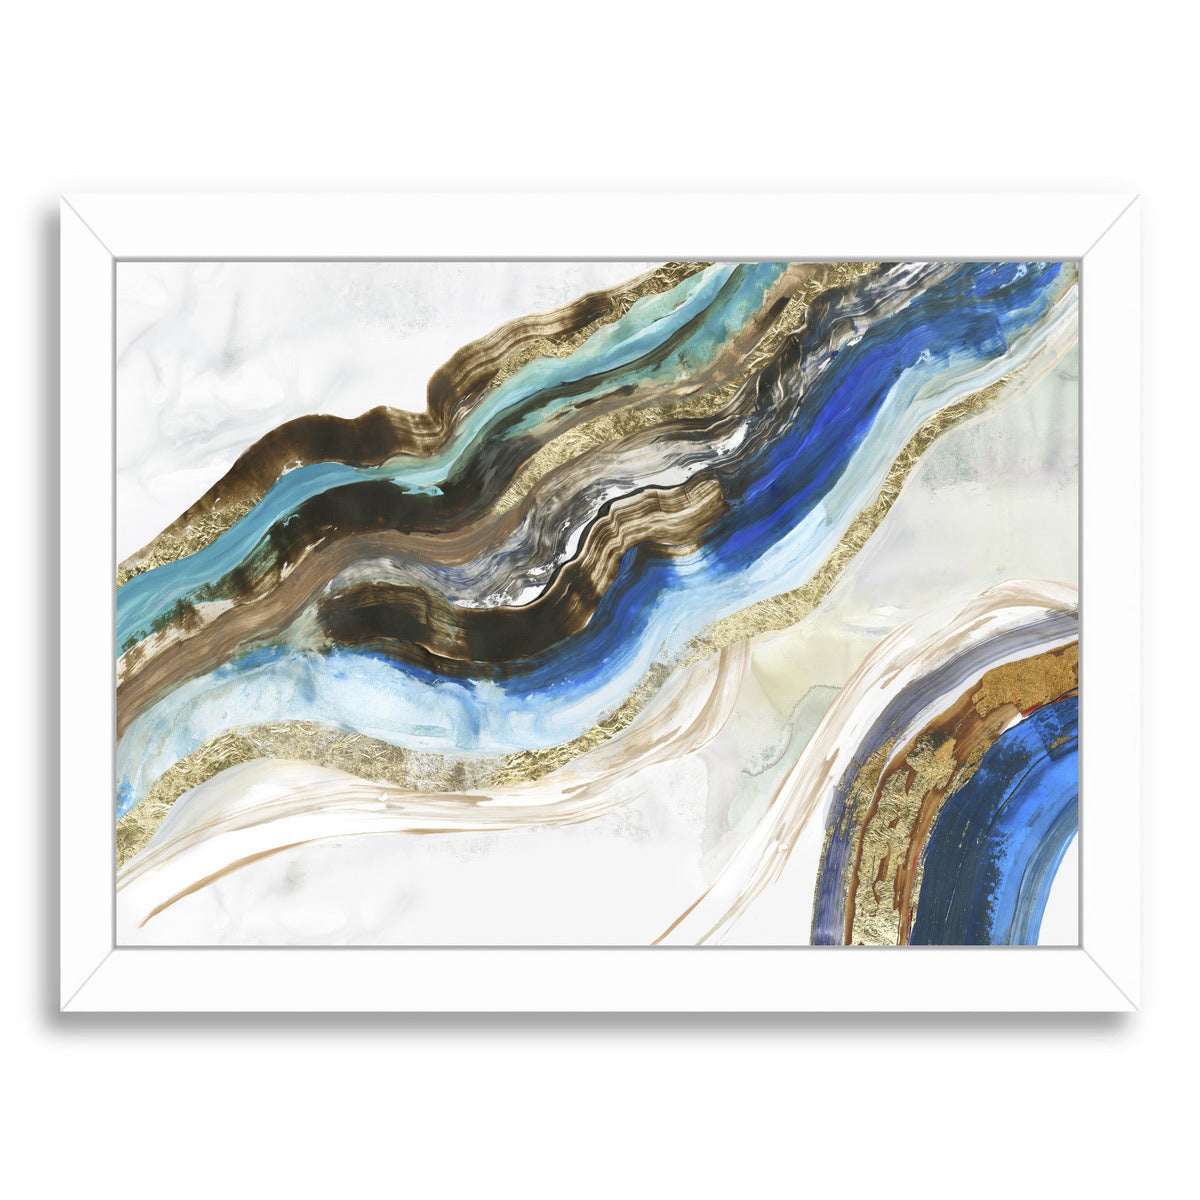 Crystalized Iii by PI Creative Art Framed Print - Americanflat